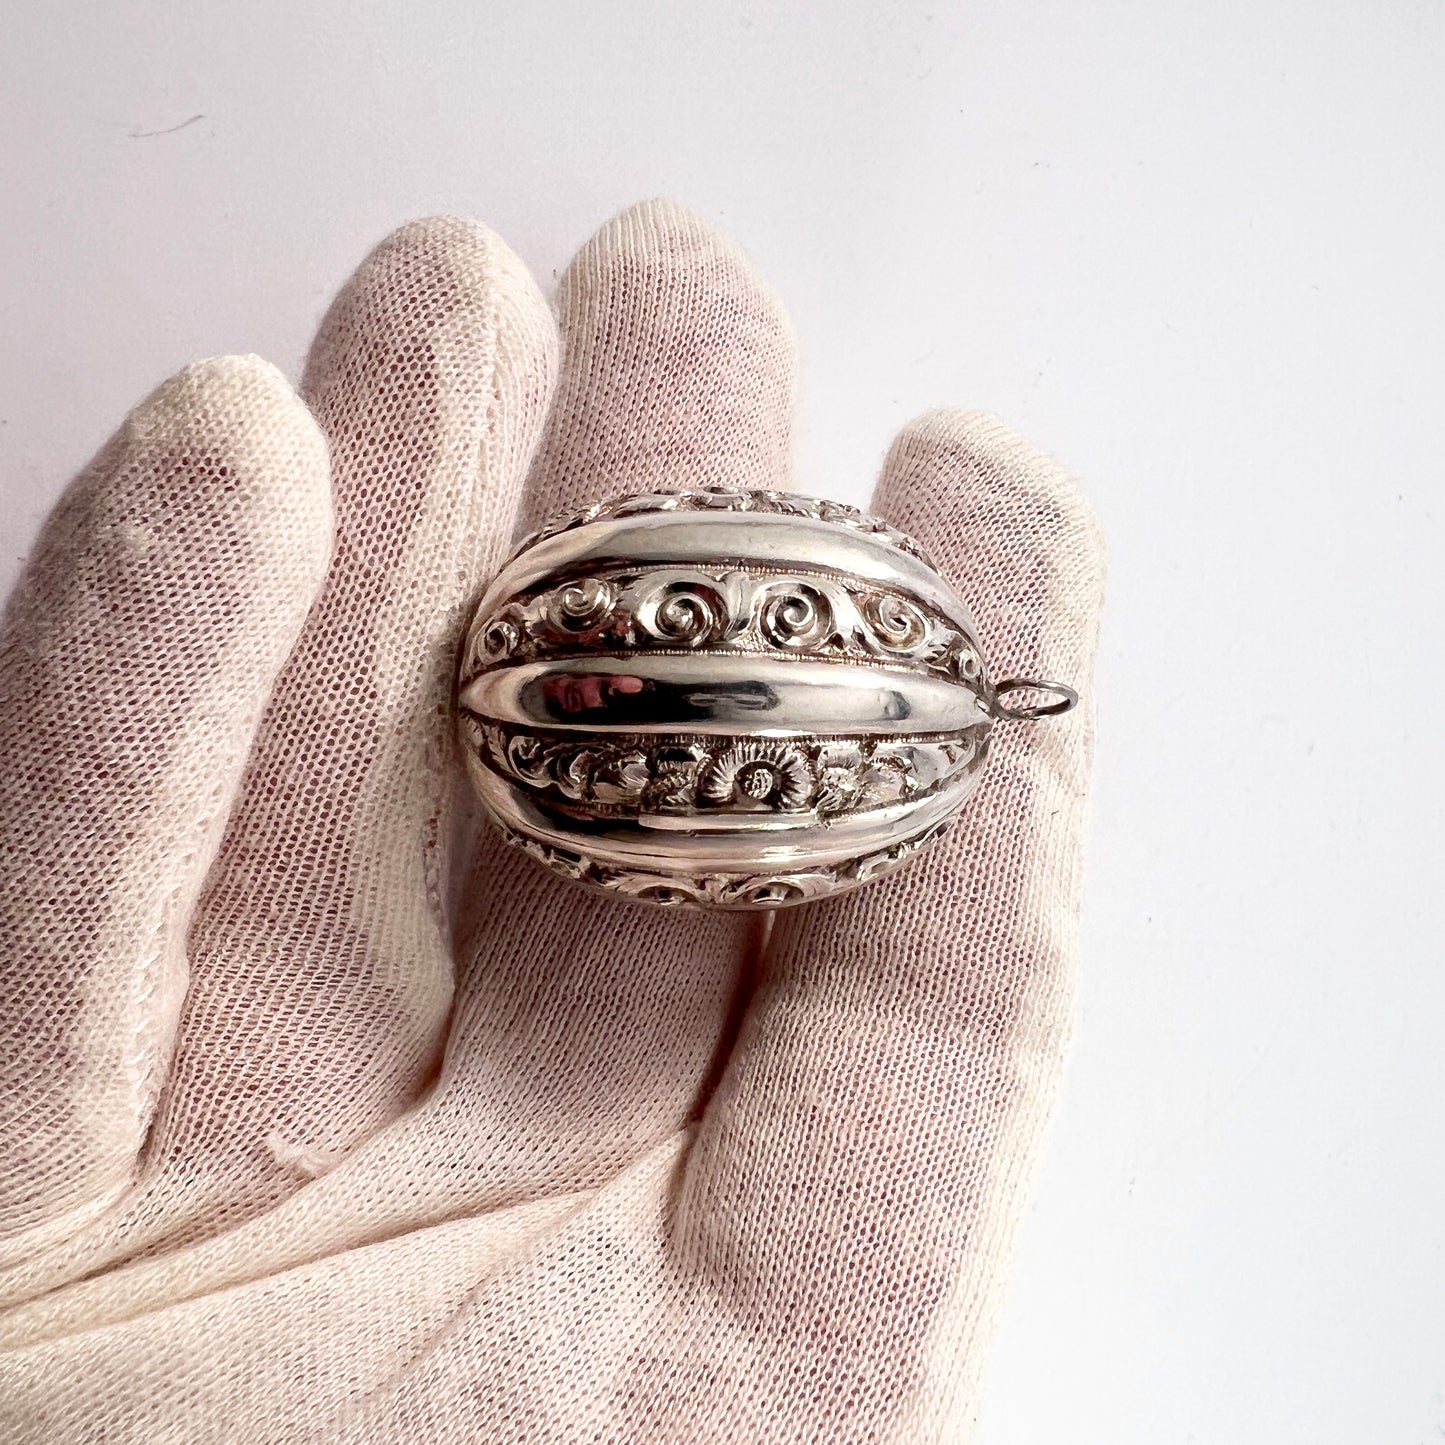 Interesting Georgian or early Victorian Hand Chased Silver Plated Closed Compartment Heavy Pendant.